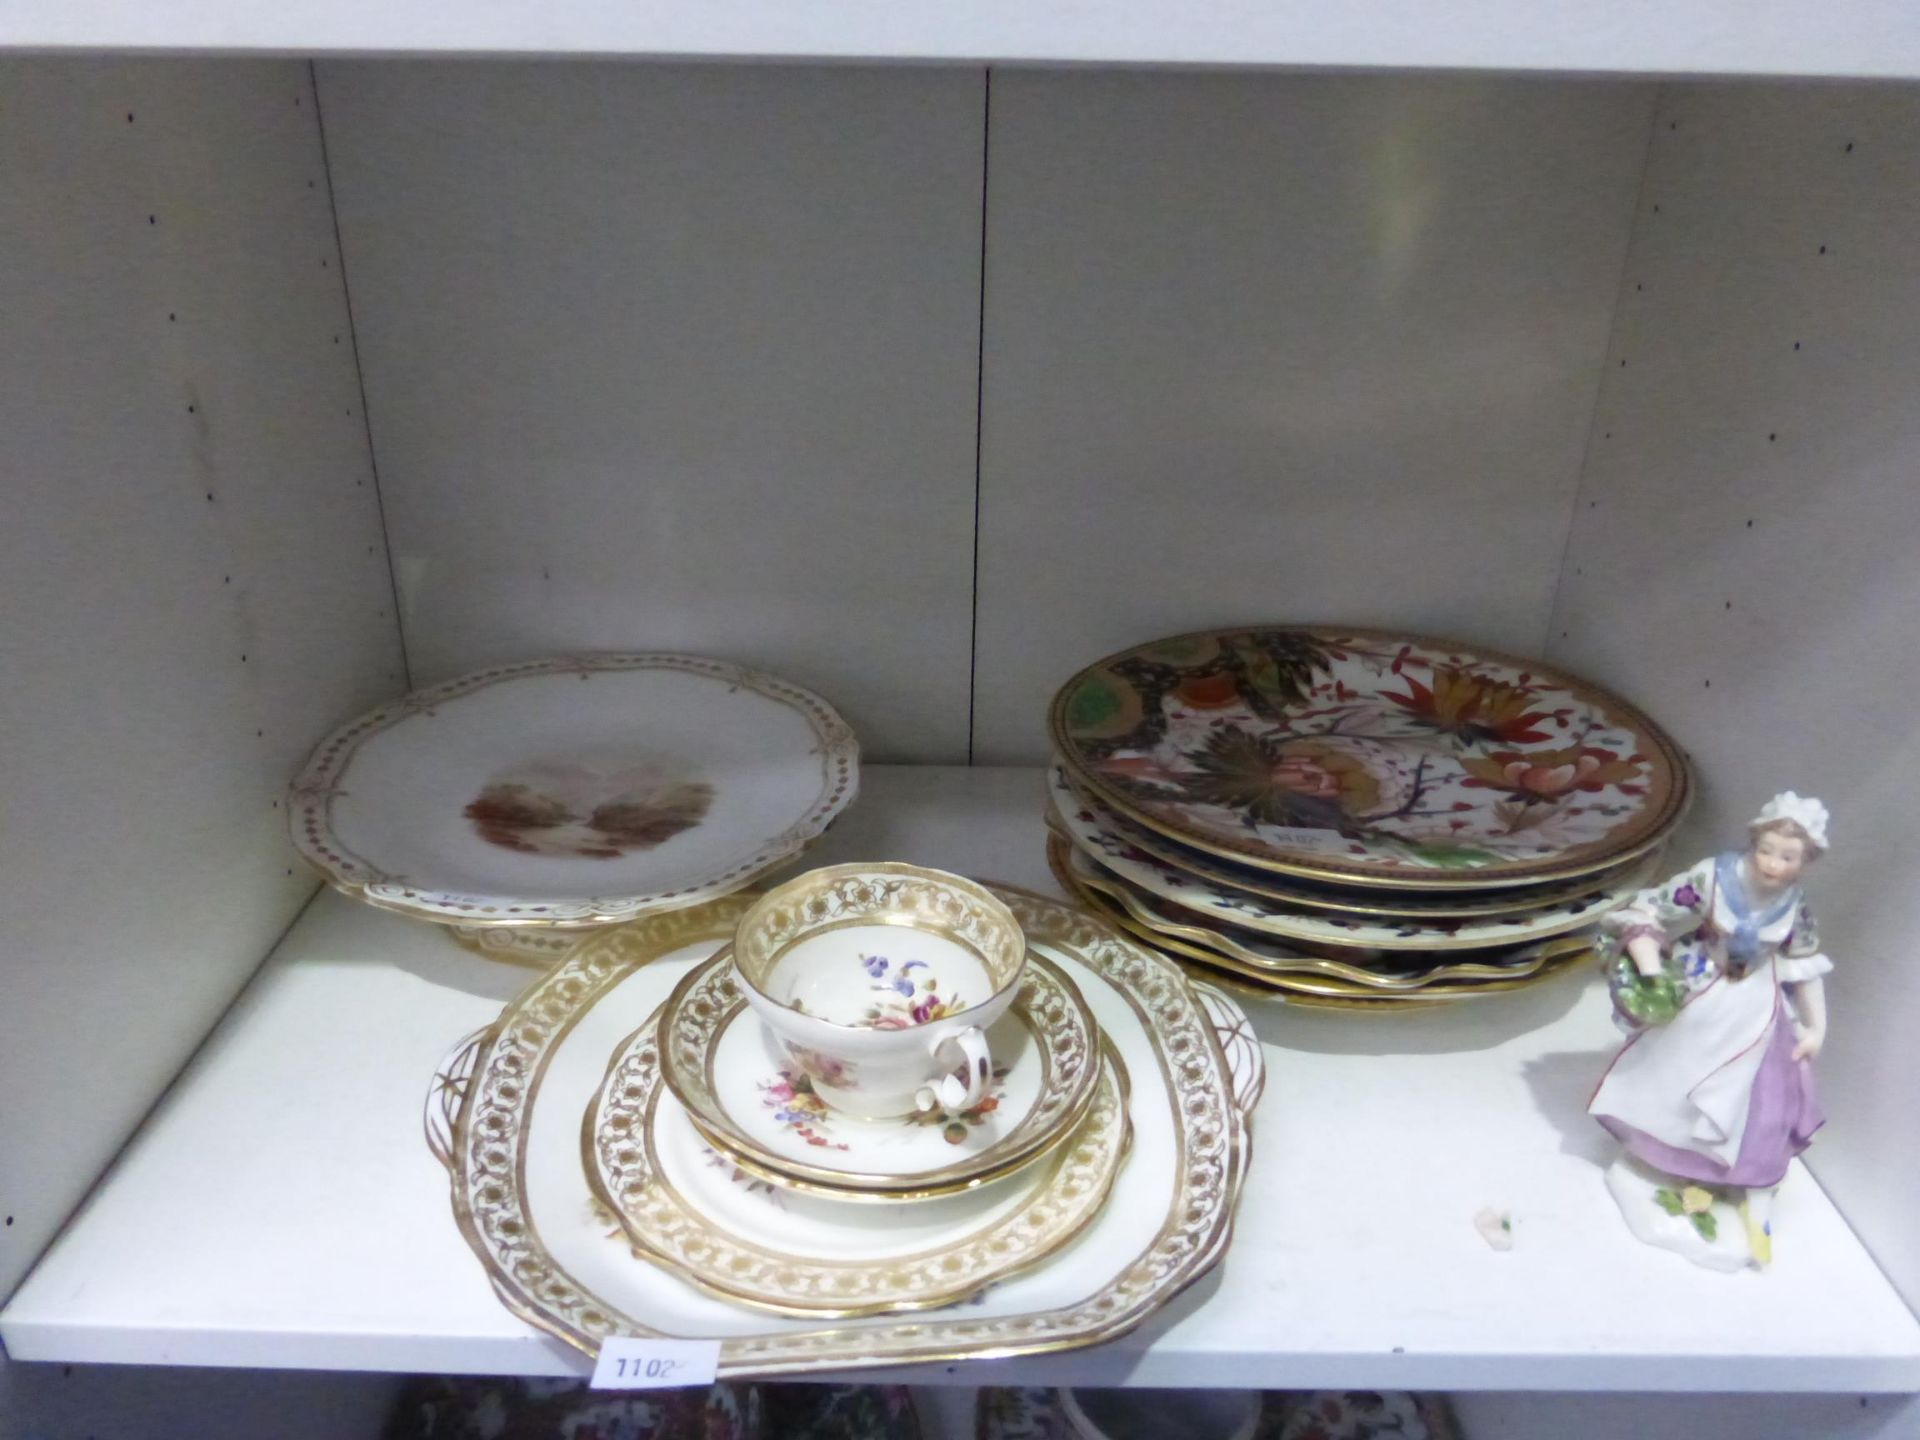 A selection of decorative Plates (some a/f) (may include a Royal Crown Derby Plate) five pieces of